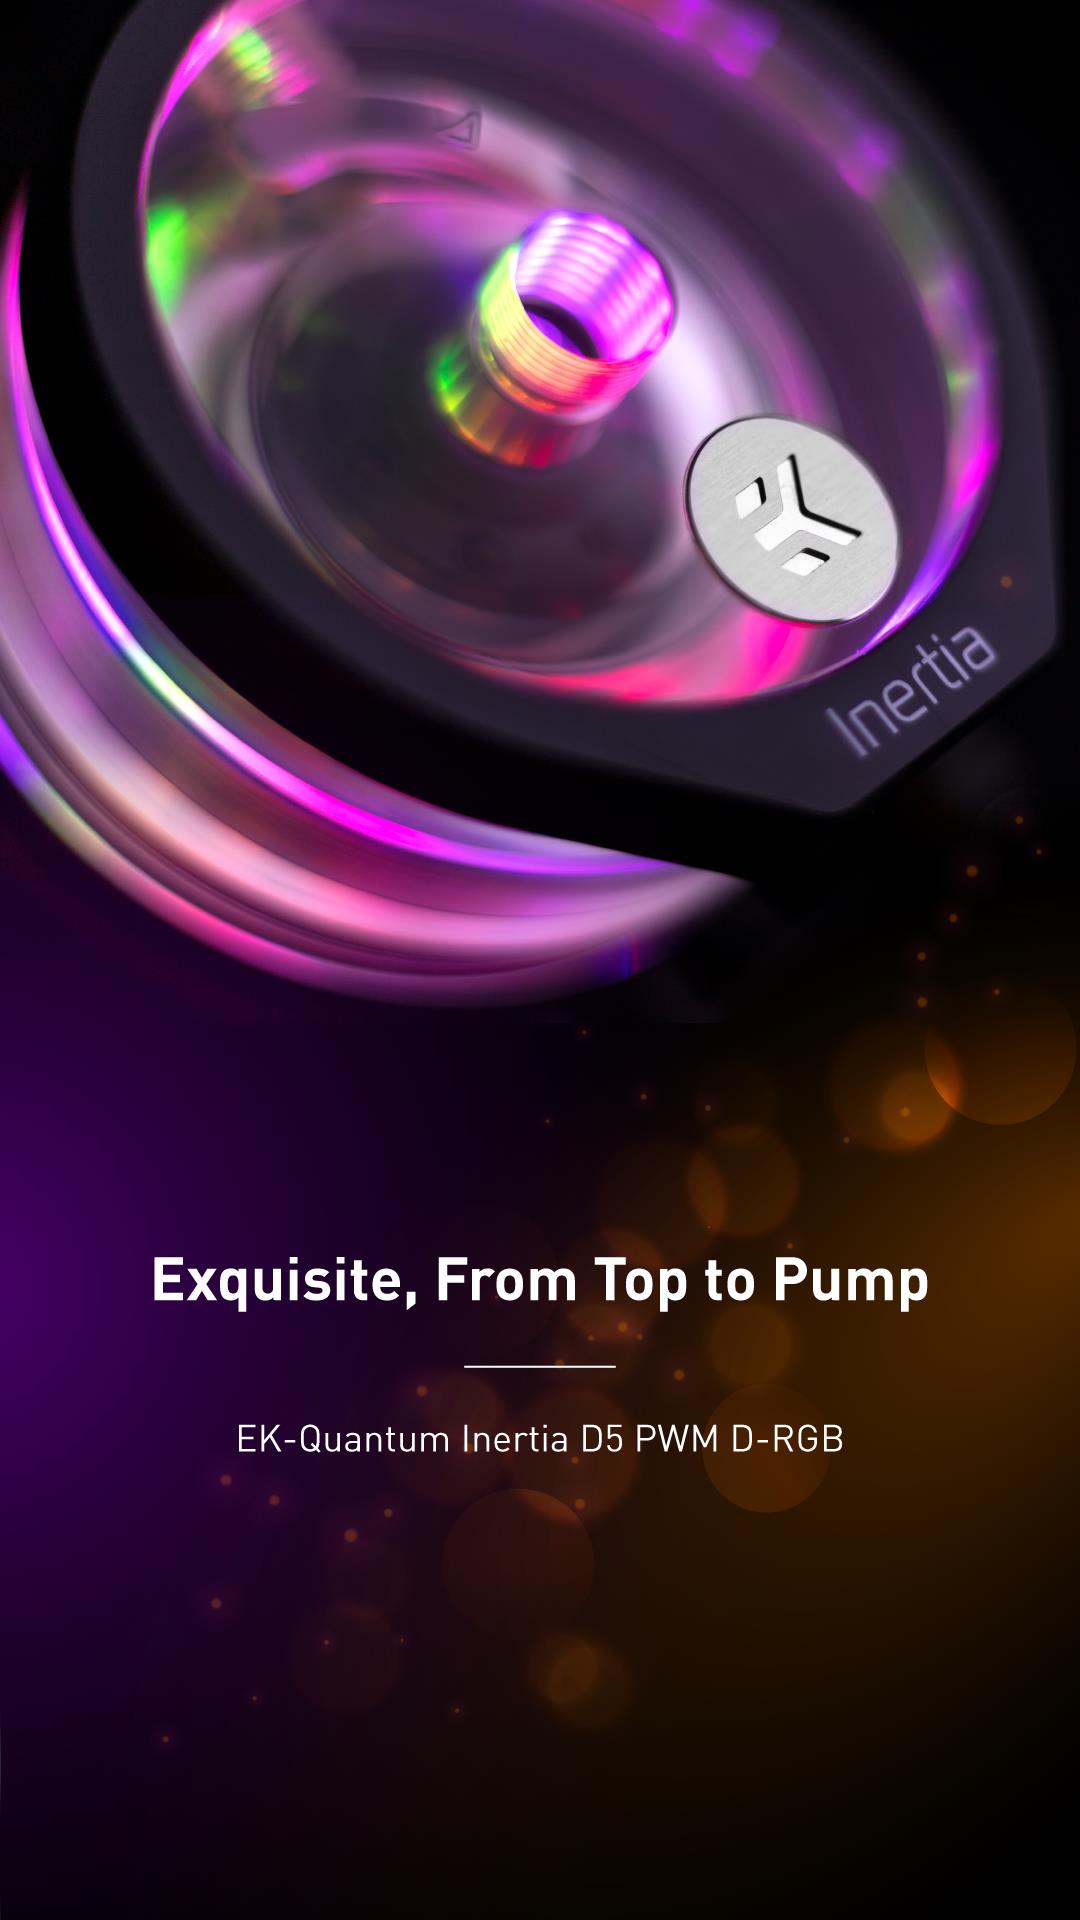 A large marketing image providing additional information about the product EK Quantum Inertia D5 PWM D-RGB - Plexi - Additional alt info not provided